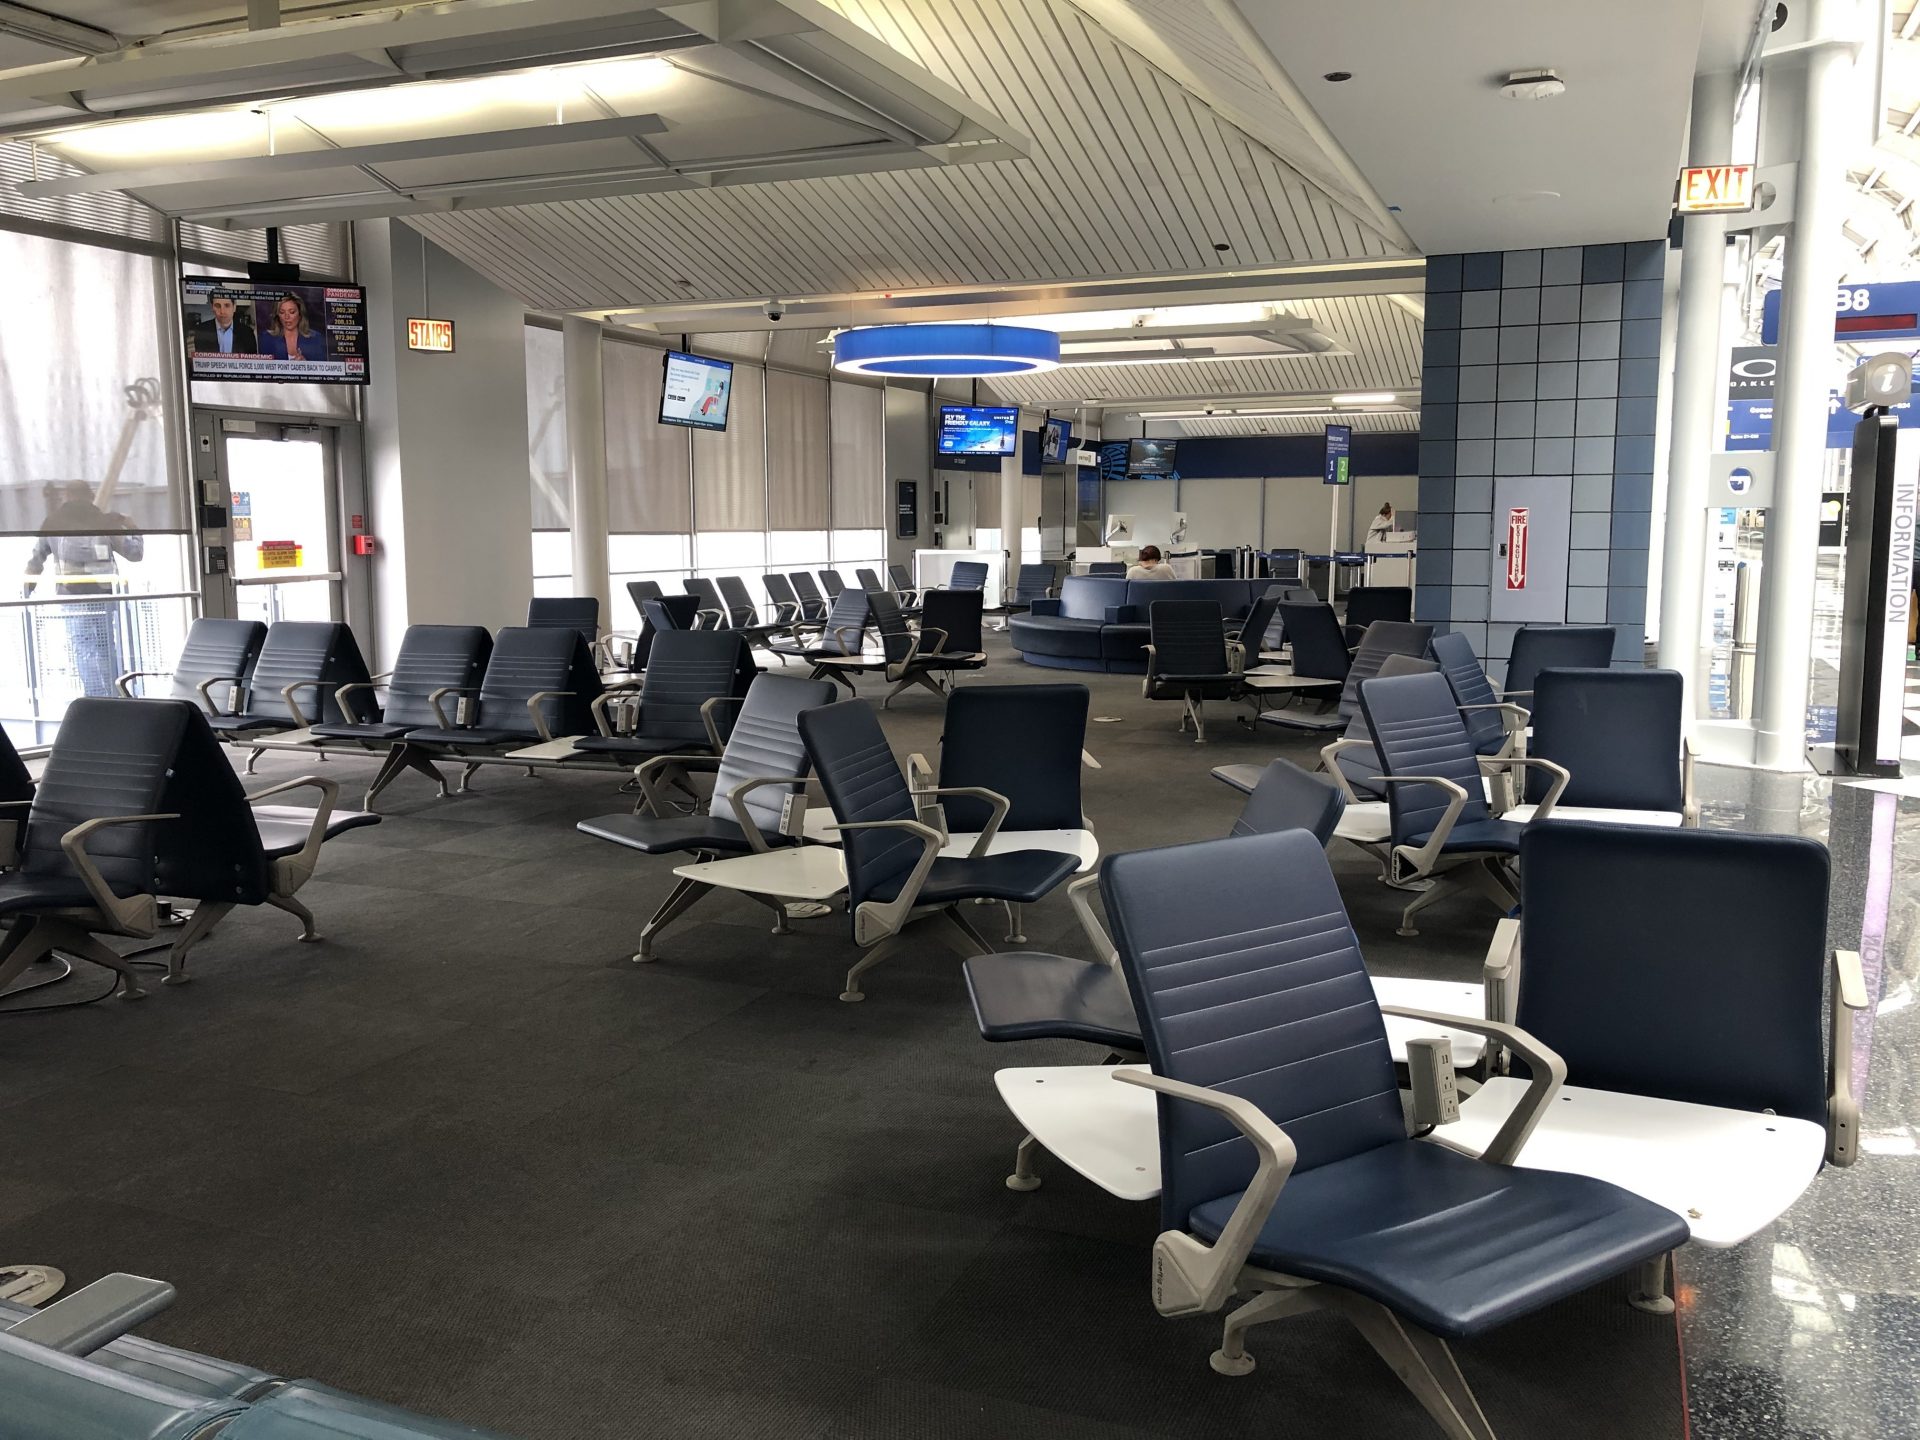 At O'Hare Airport in Chicago, normally packed gate areas have scores of empty seats.